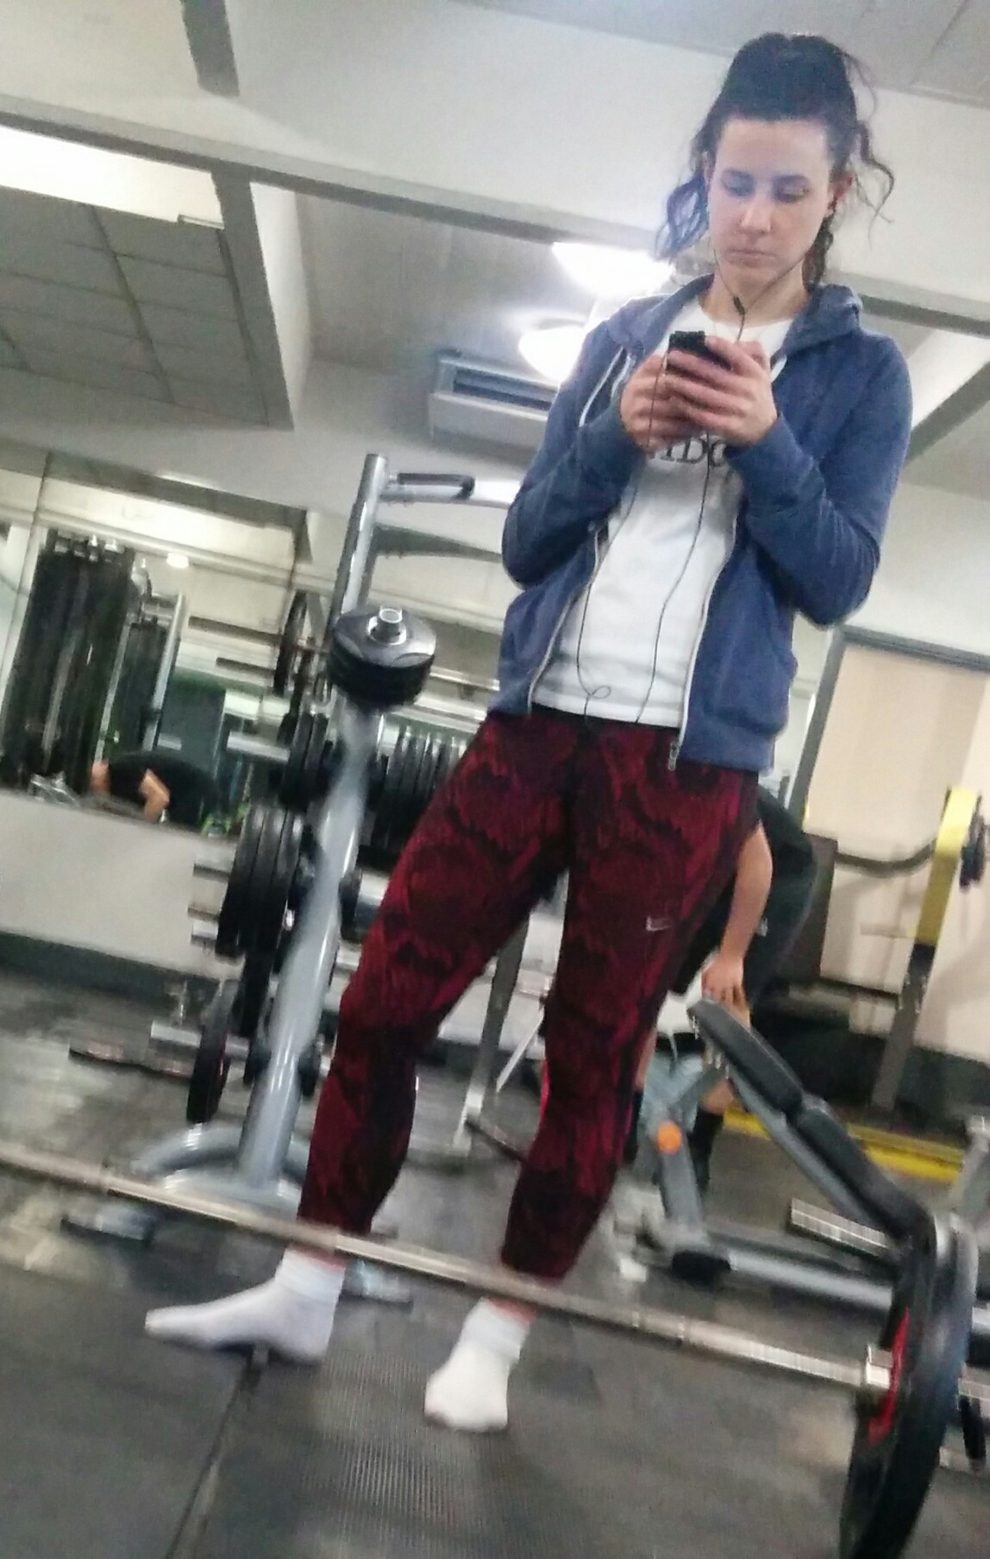 Gym pixie without shoes doing deadlift